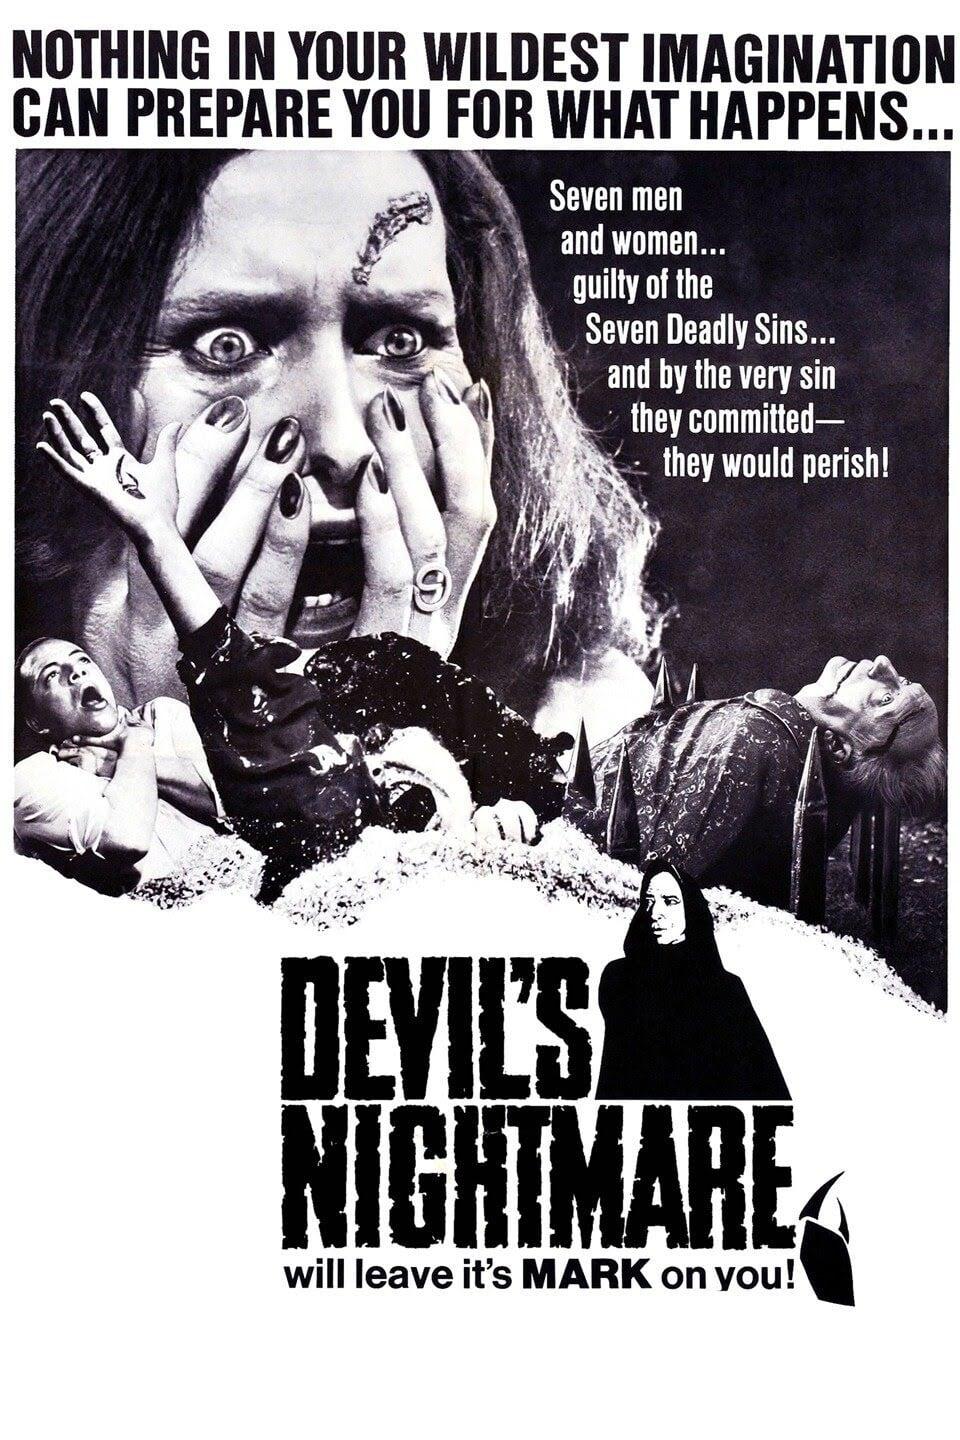 The Devil's Nightmare poster